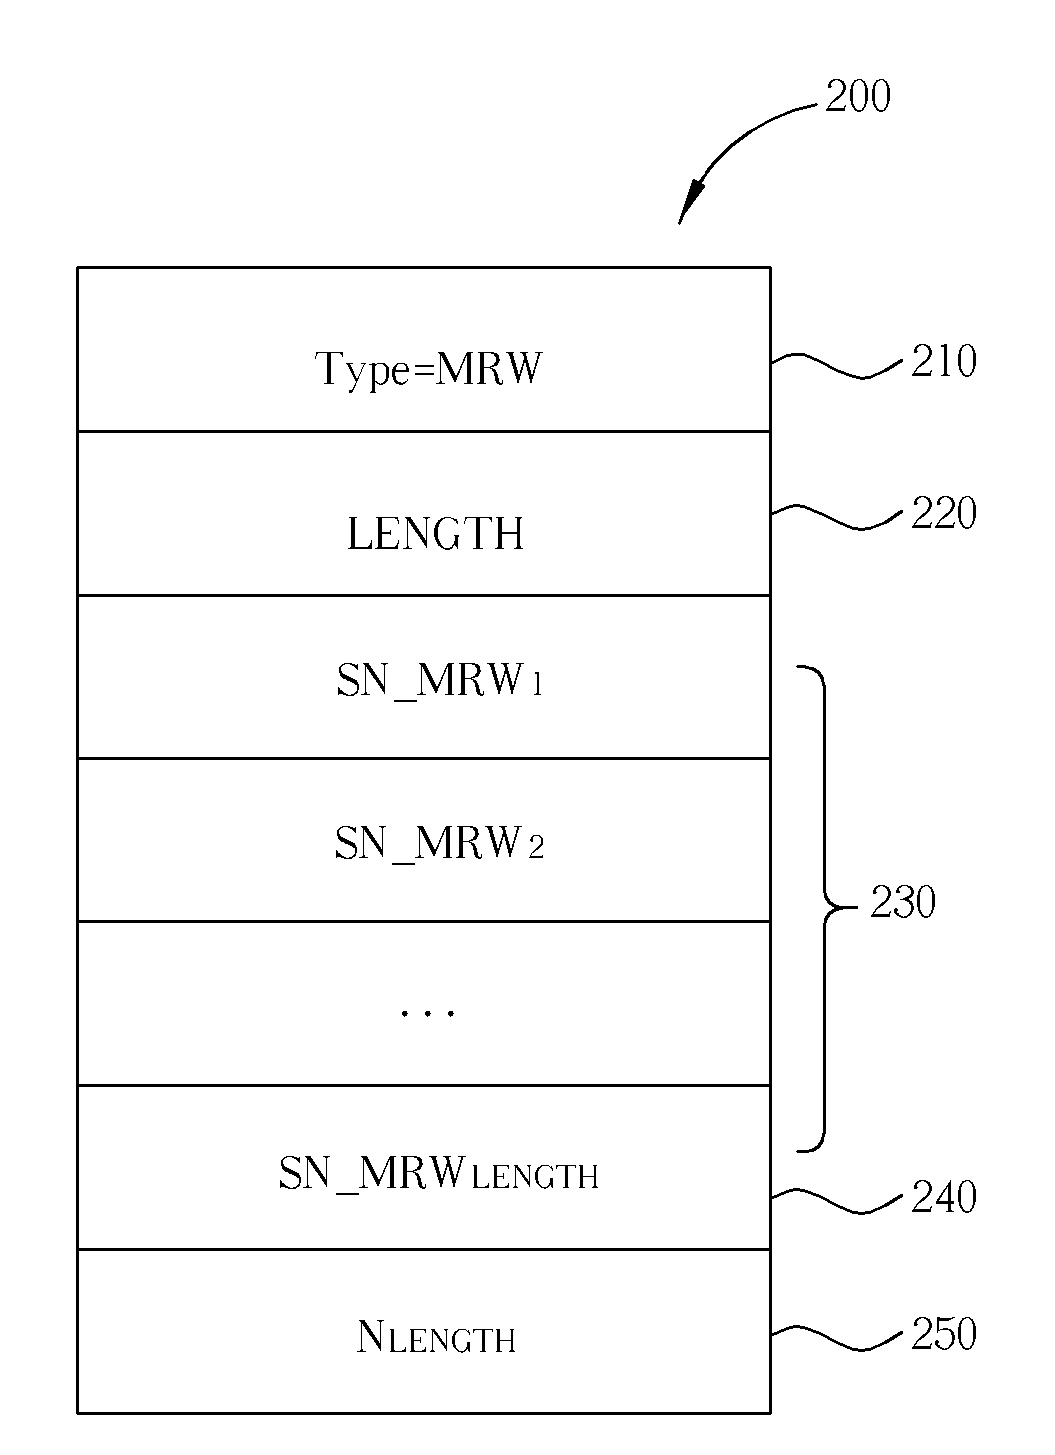 Data discard signalling procedure in a wireless communication system